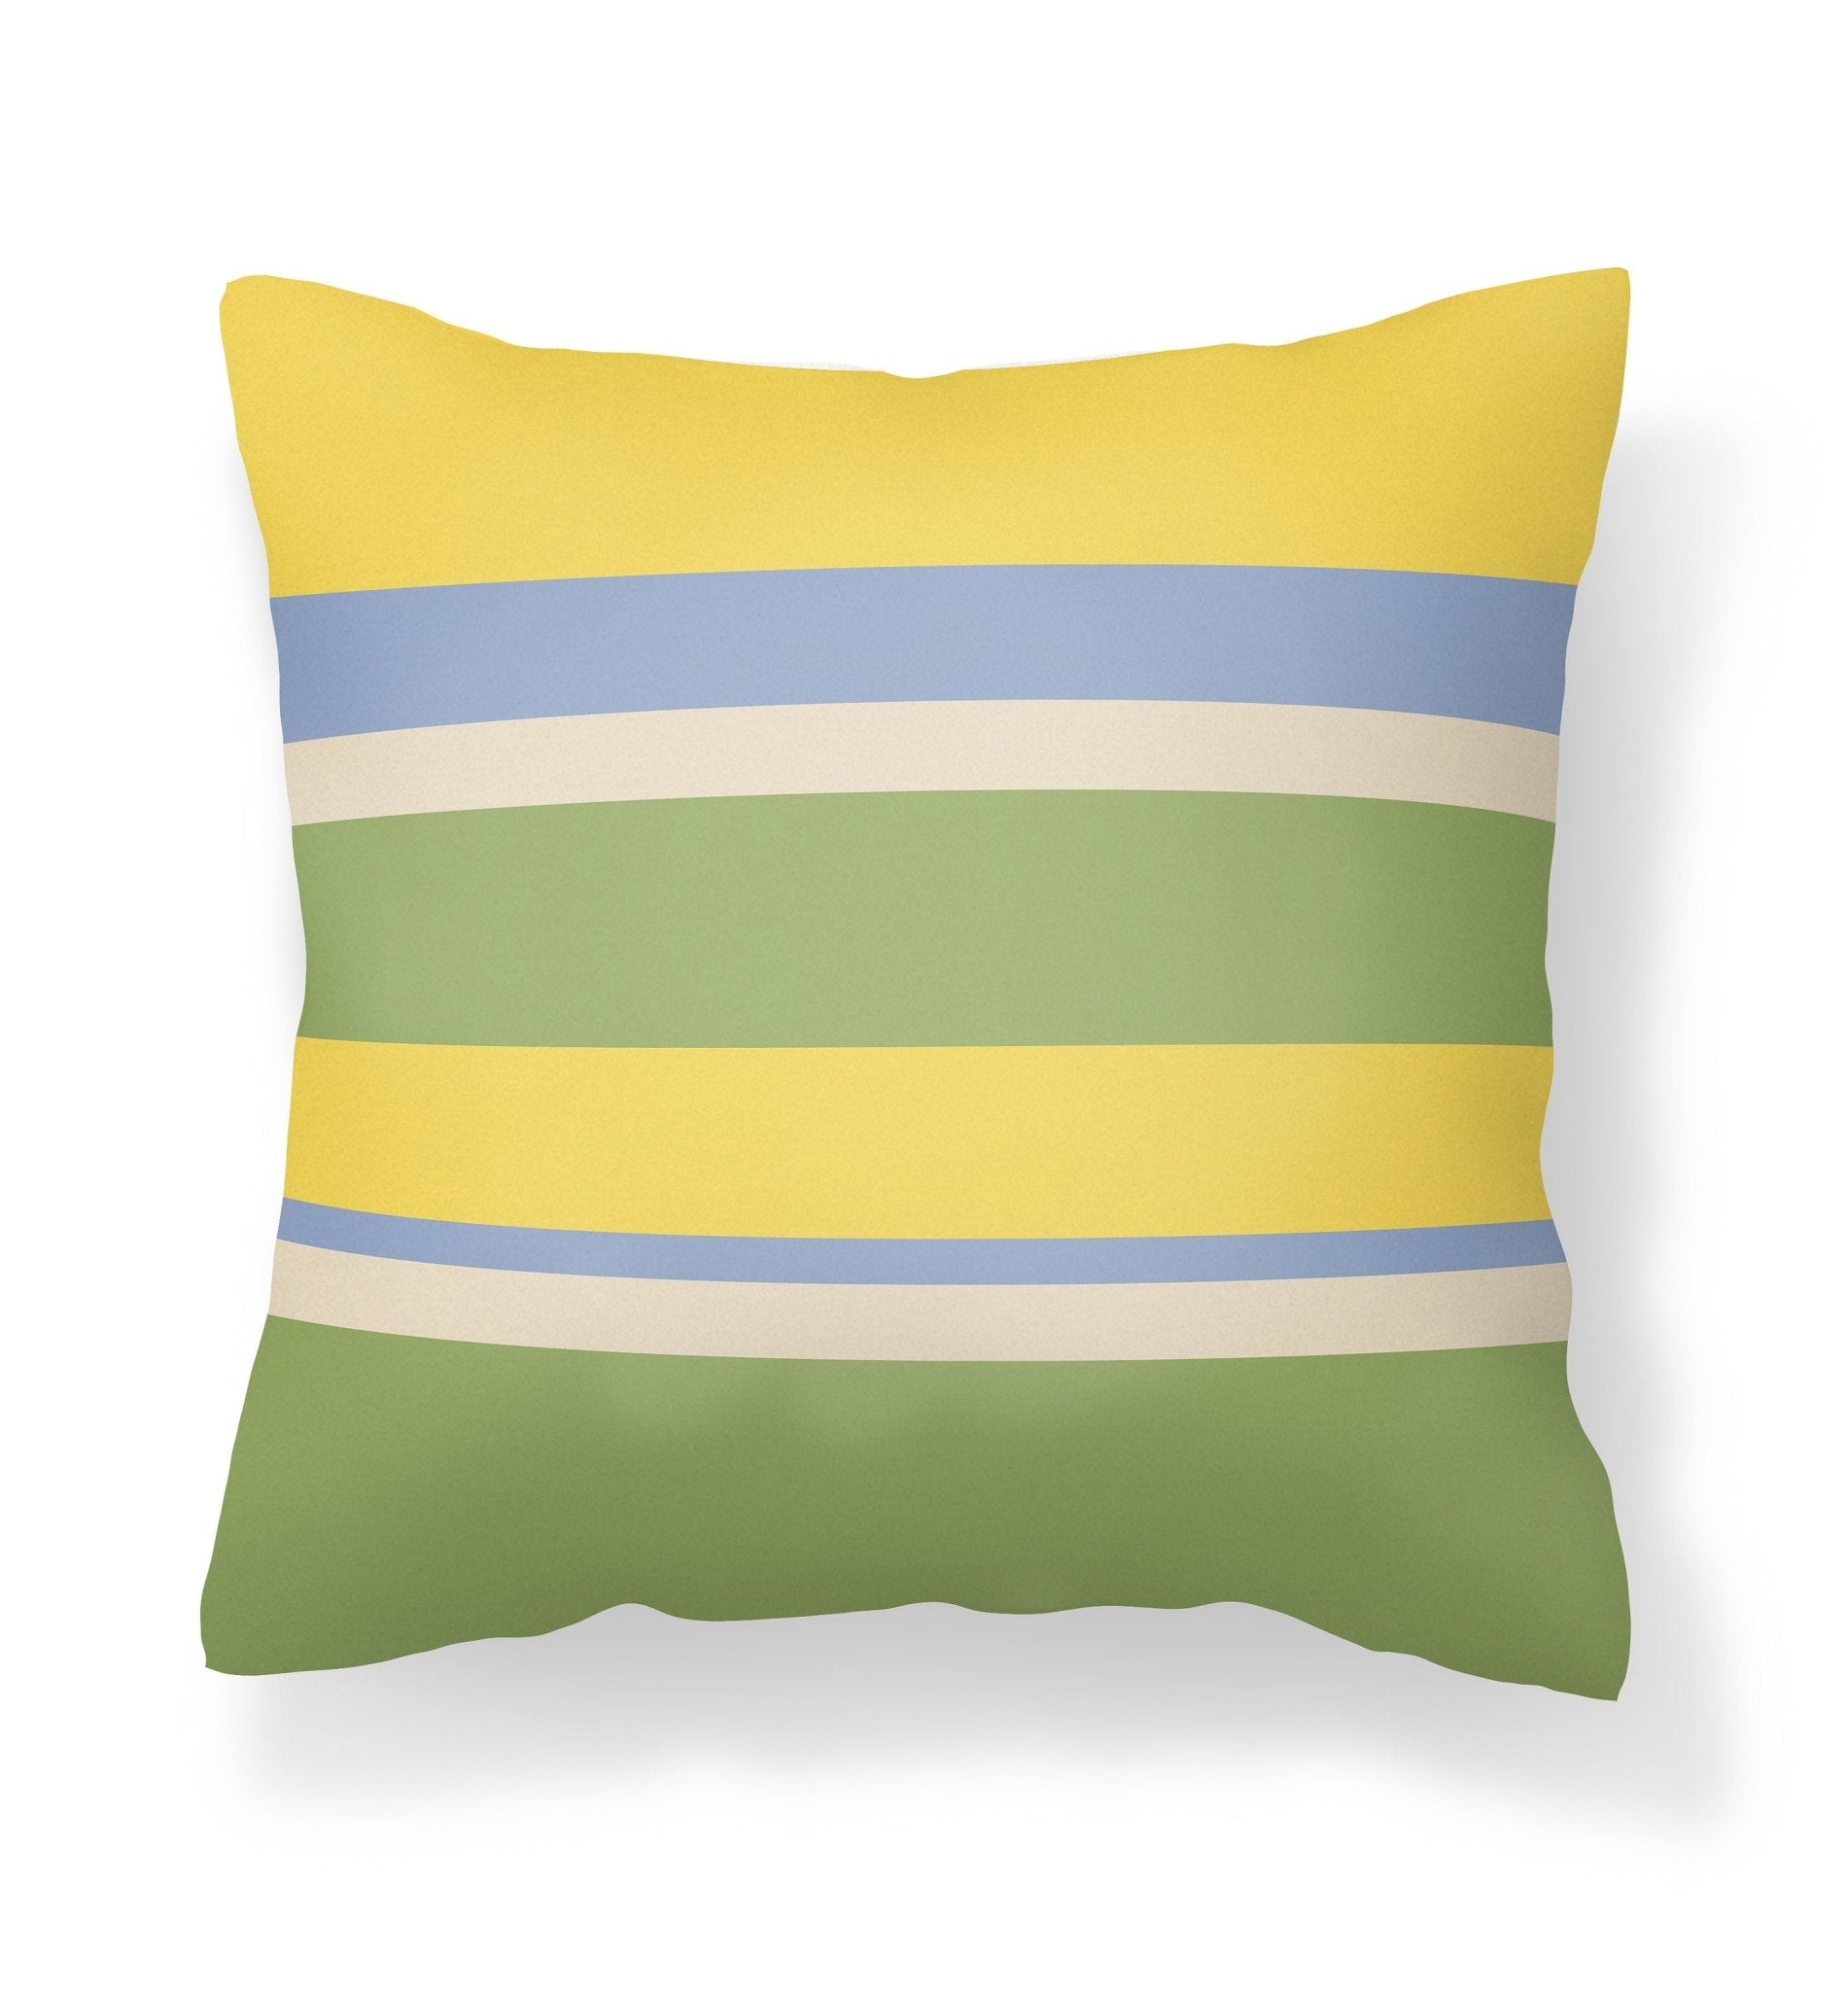 Outdoor Pillow - Green, Yellow and Blue Striped - Throw Pillows